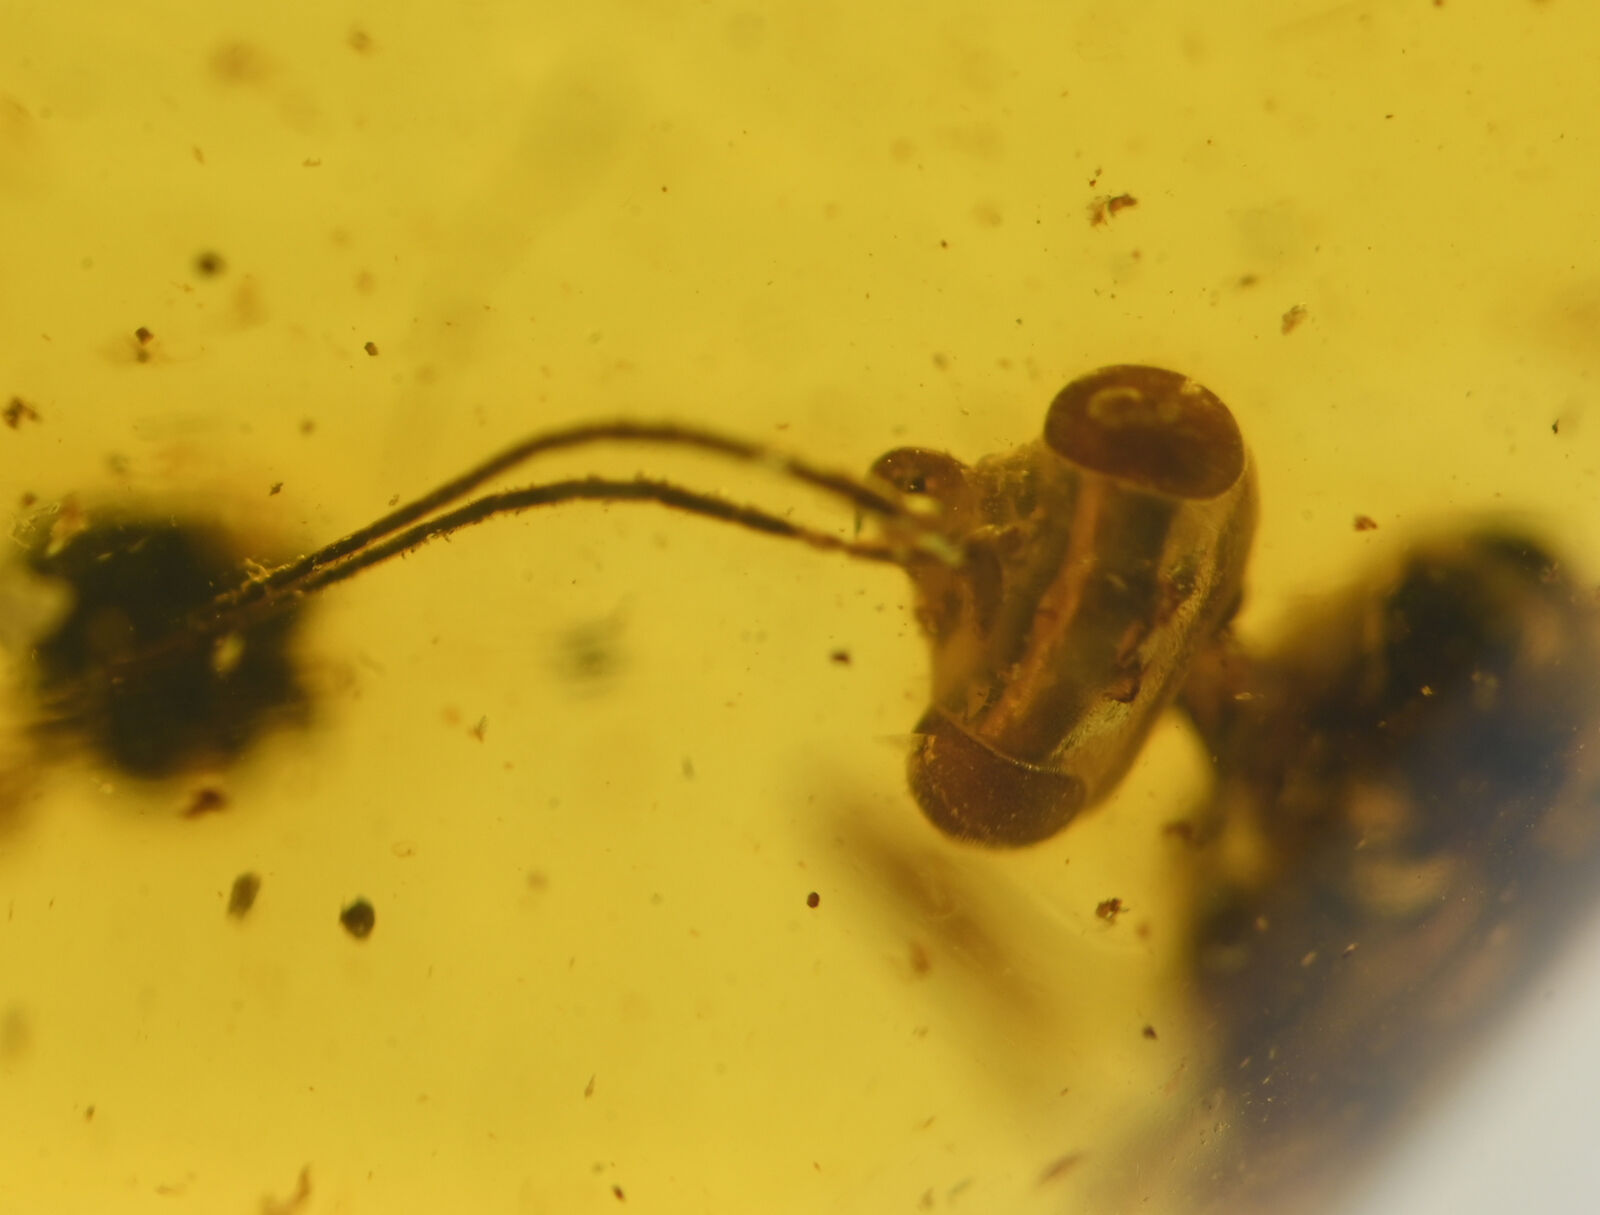 Hymenoptera (Wasp), Fossil insect inclusion in Burmese Amber